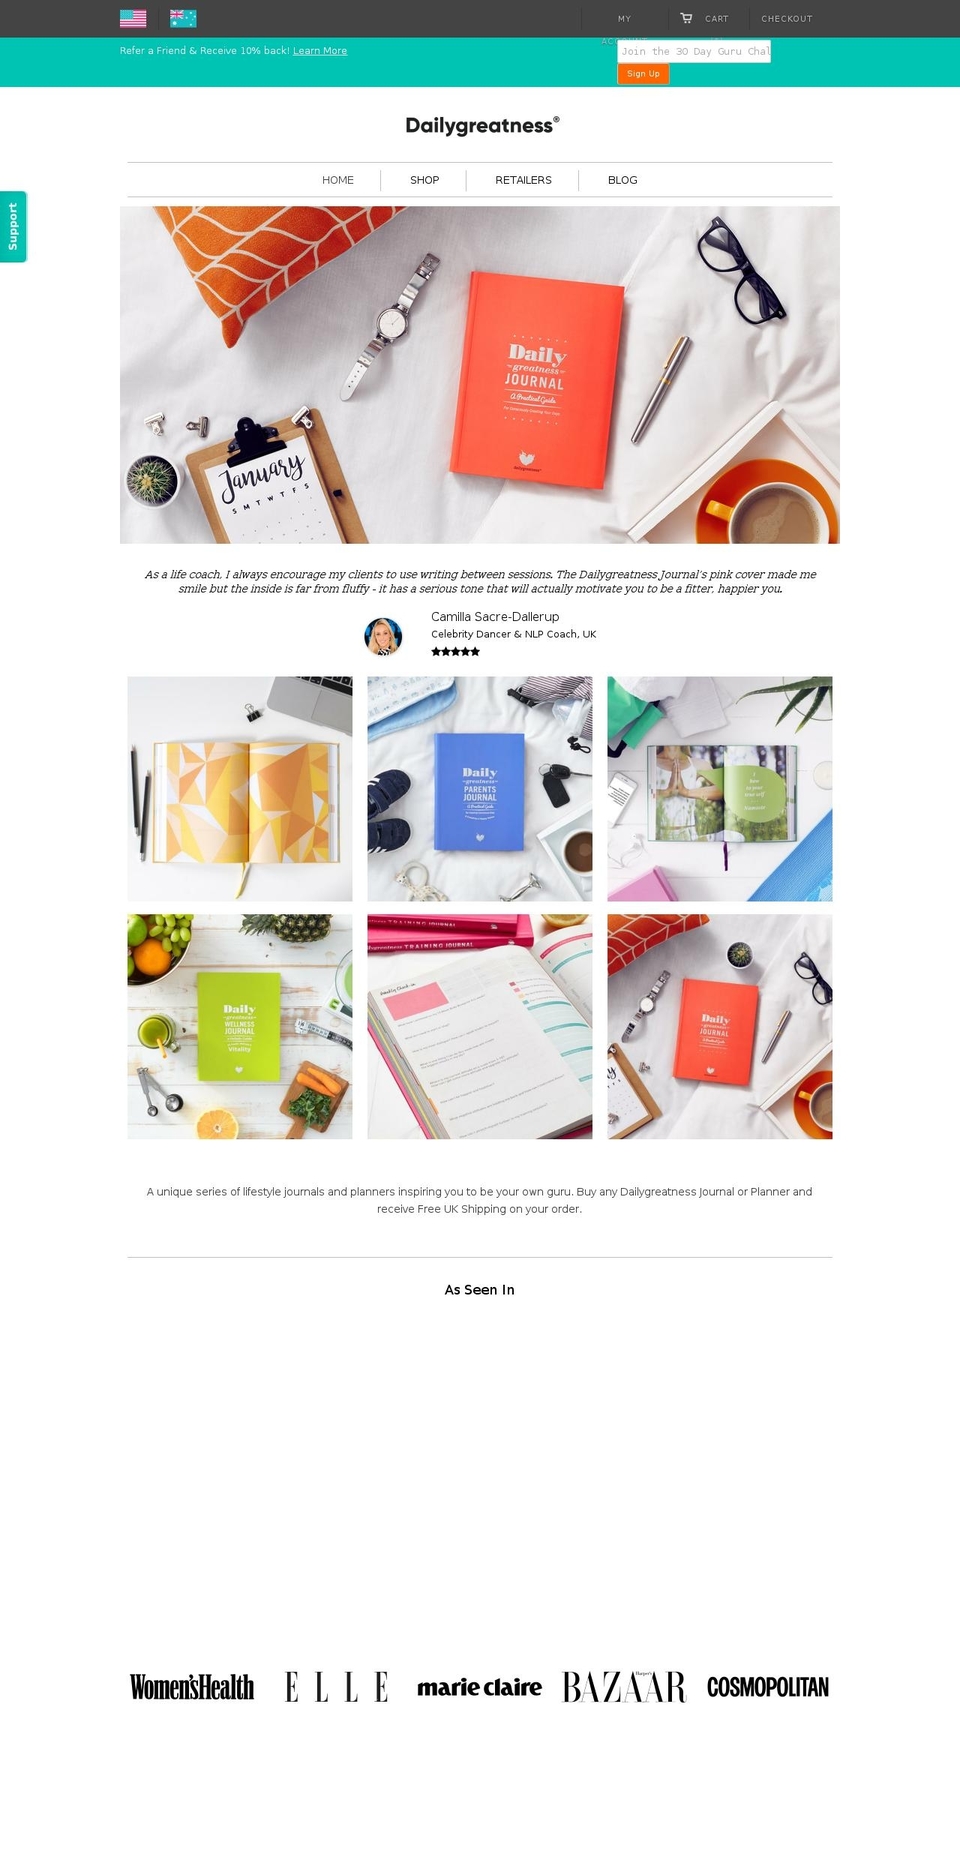 Production Shopify theme site example dailygreatnessjournal.myshopify.com